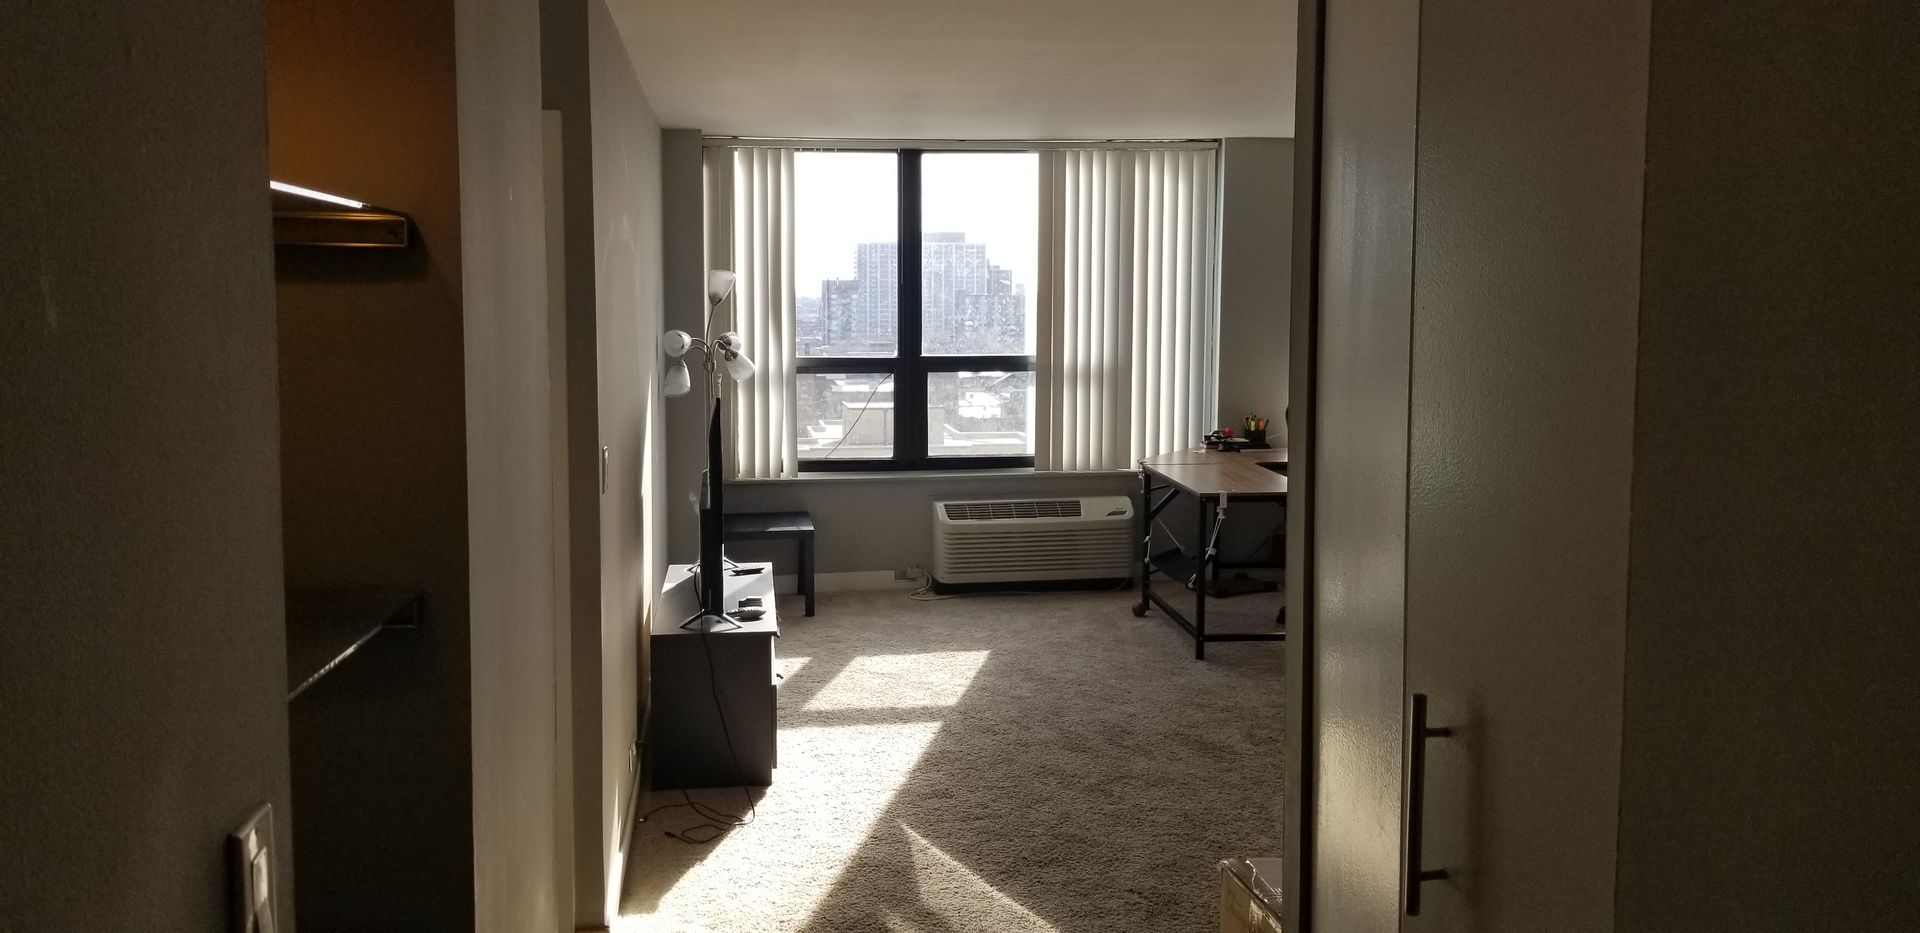 Photo 11: Photos: 5100 N Marine Drive Unit 13G in Chicago: CHI - Uptown Residential for sale ()  : MLS®# 10934137